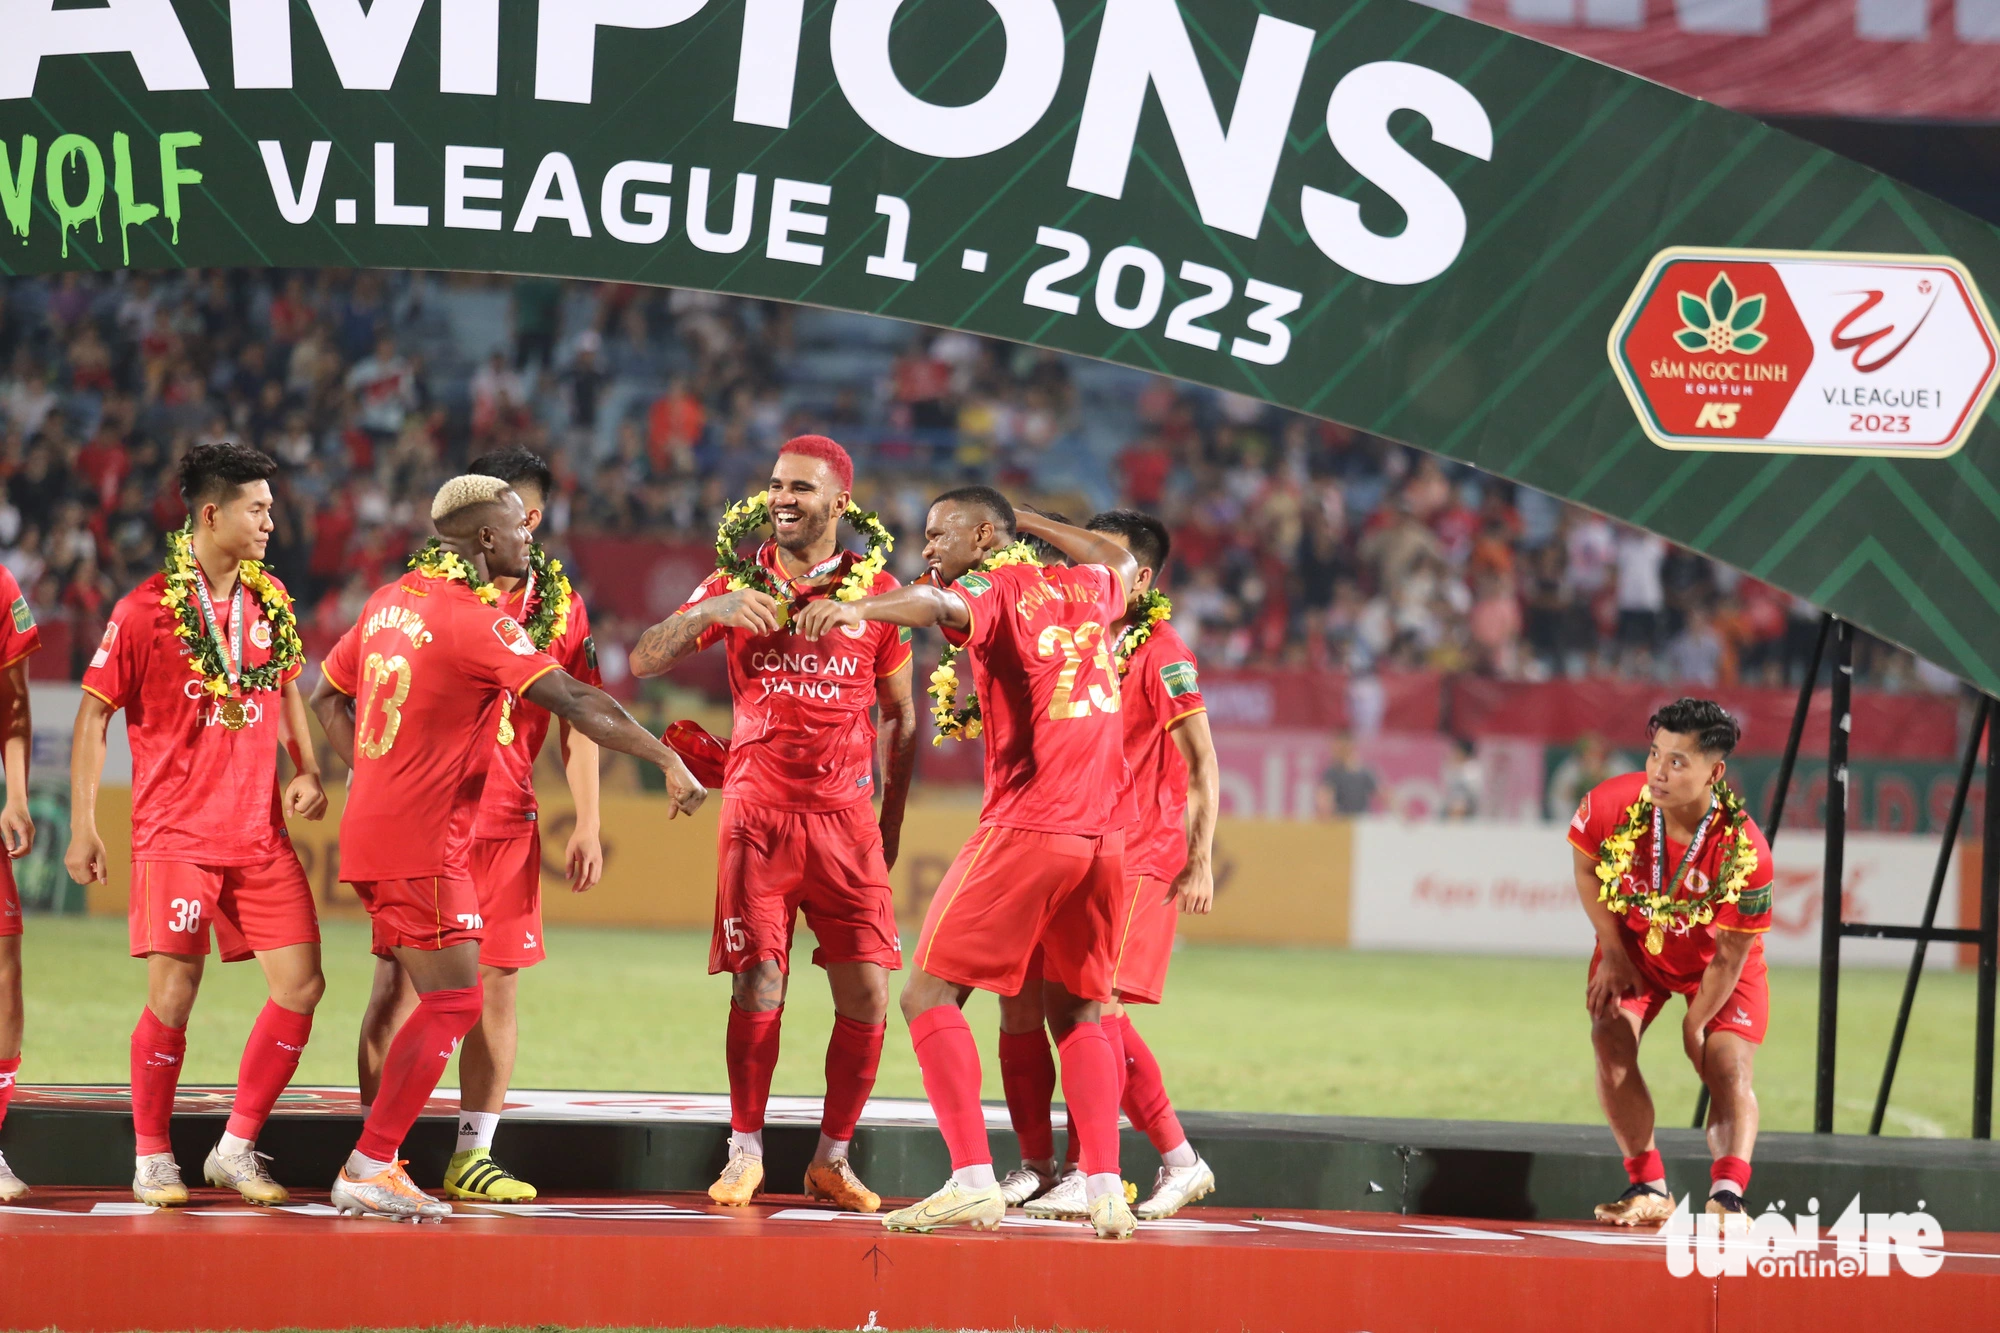 Cong An Hanoi FC players celebrate after winning the V-League 1 2023 at Hang Day Stadium in Hanoi, August 27, 2023. Photo: Nam Tran / Tuoi Tre